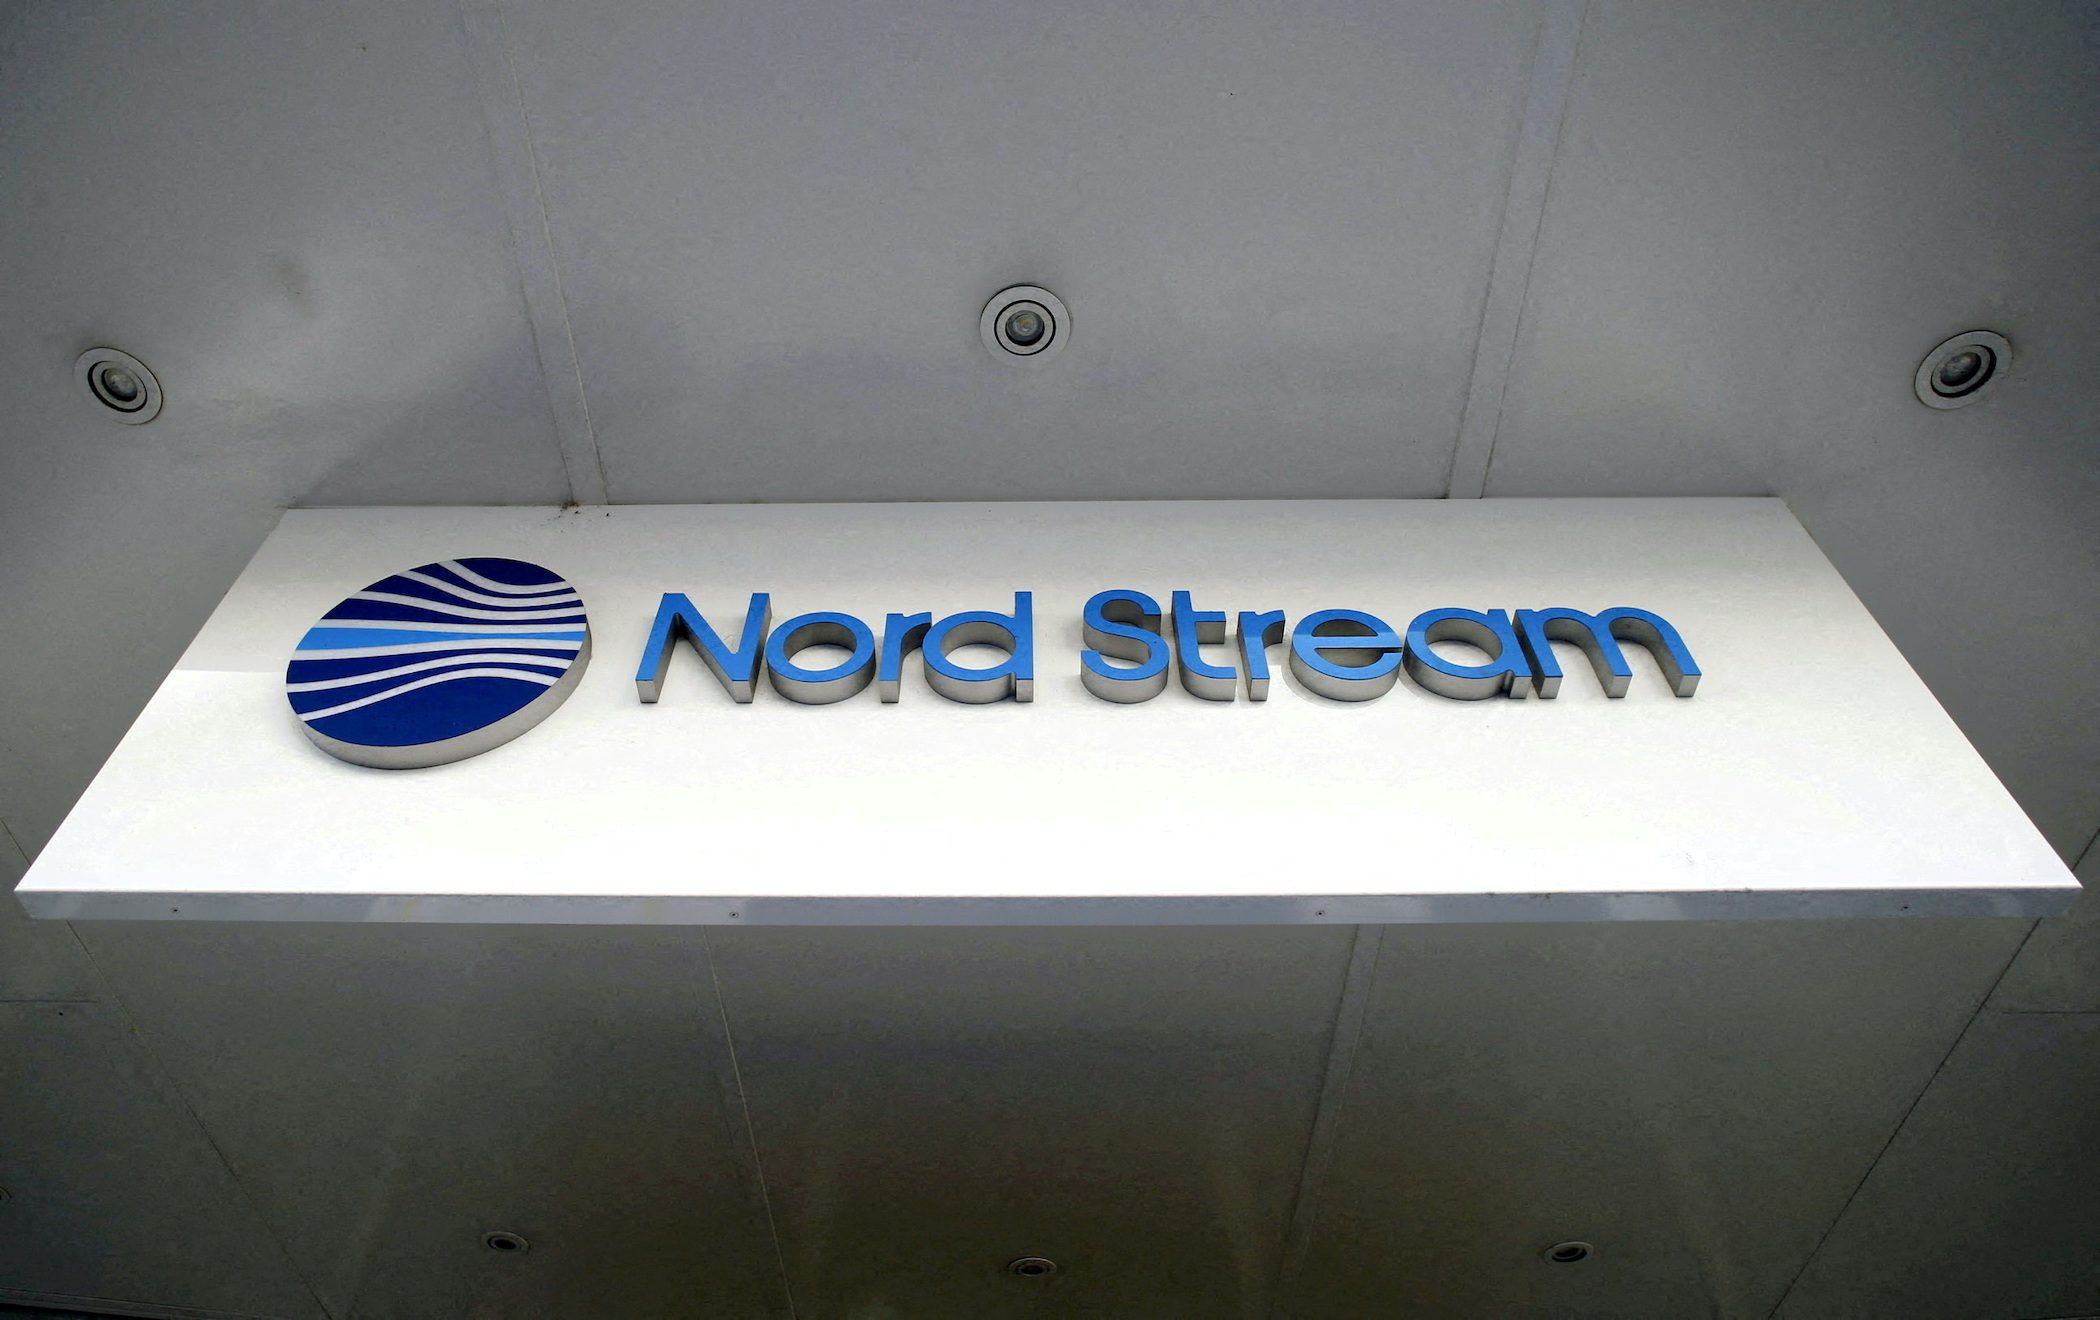 Russia says Nord Stream likely hit by state-backed ‘terrorism’